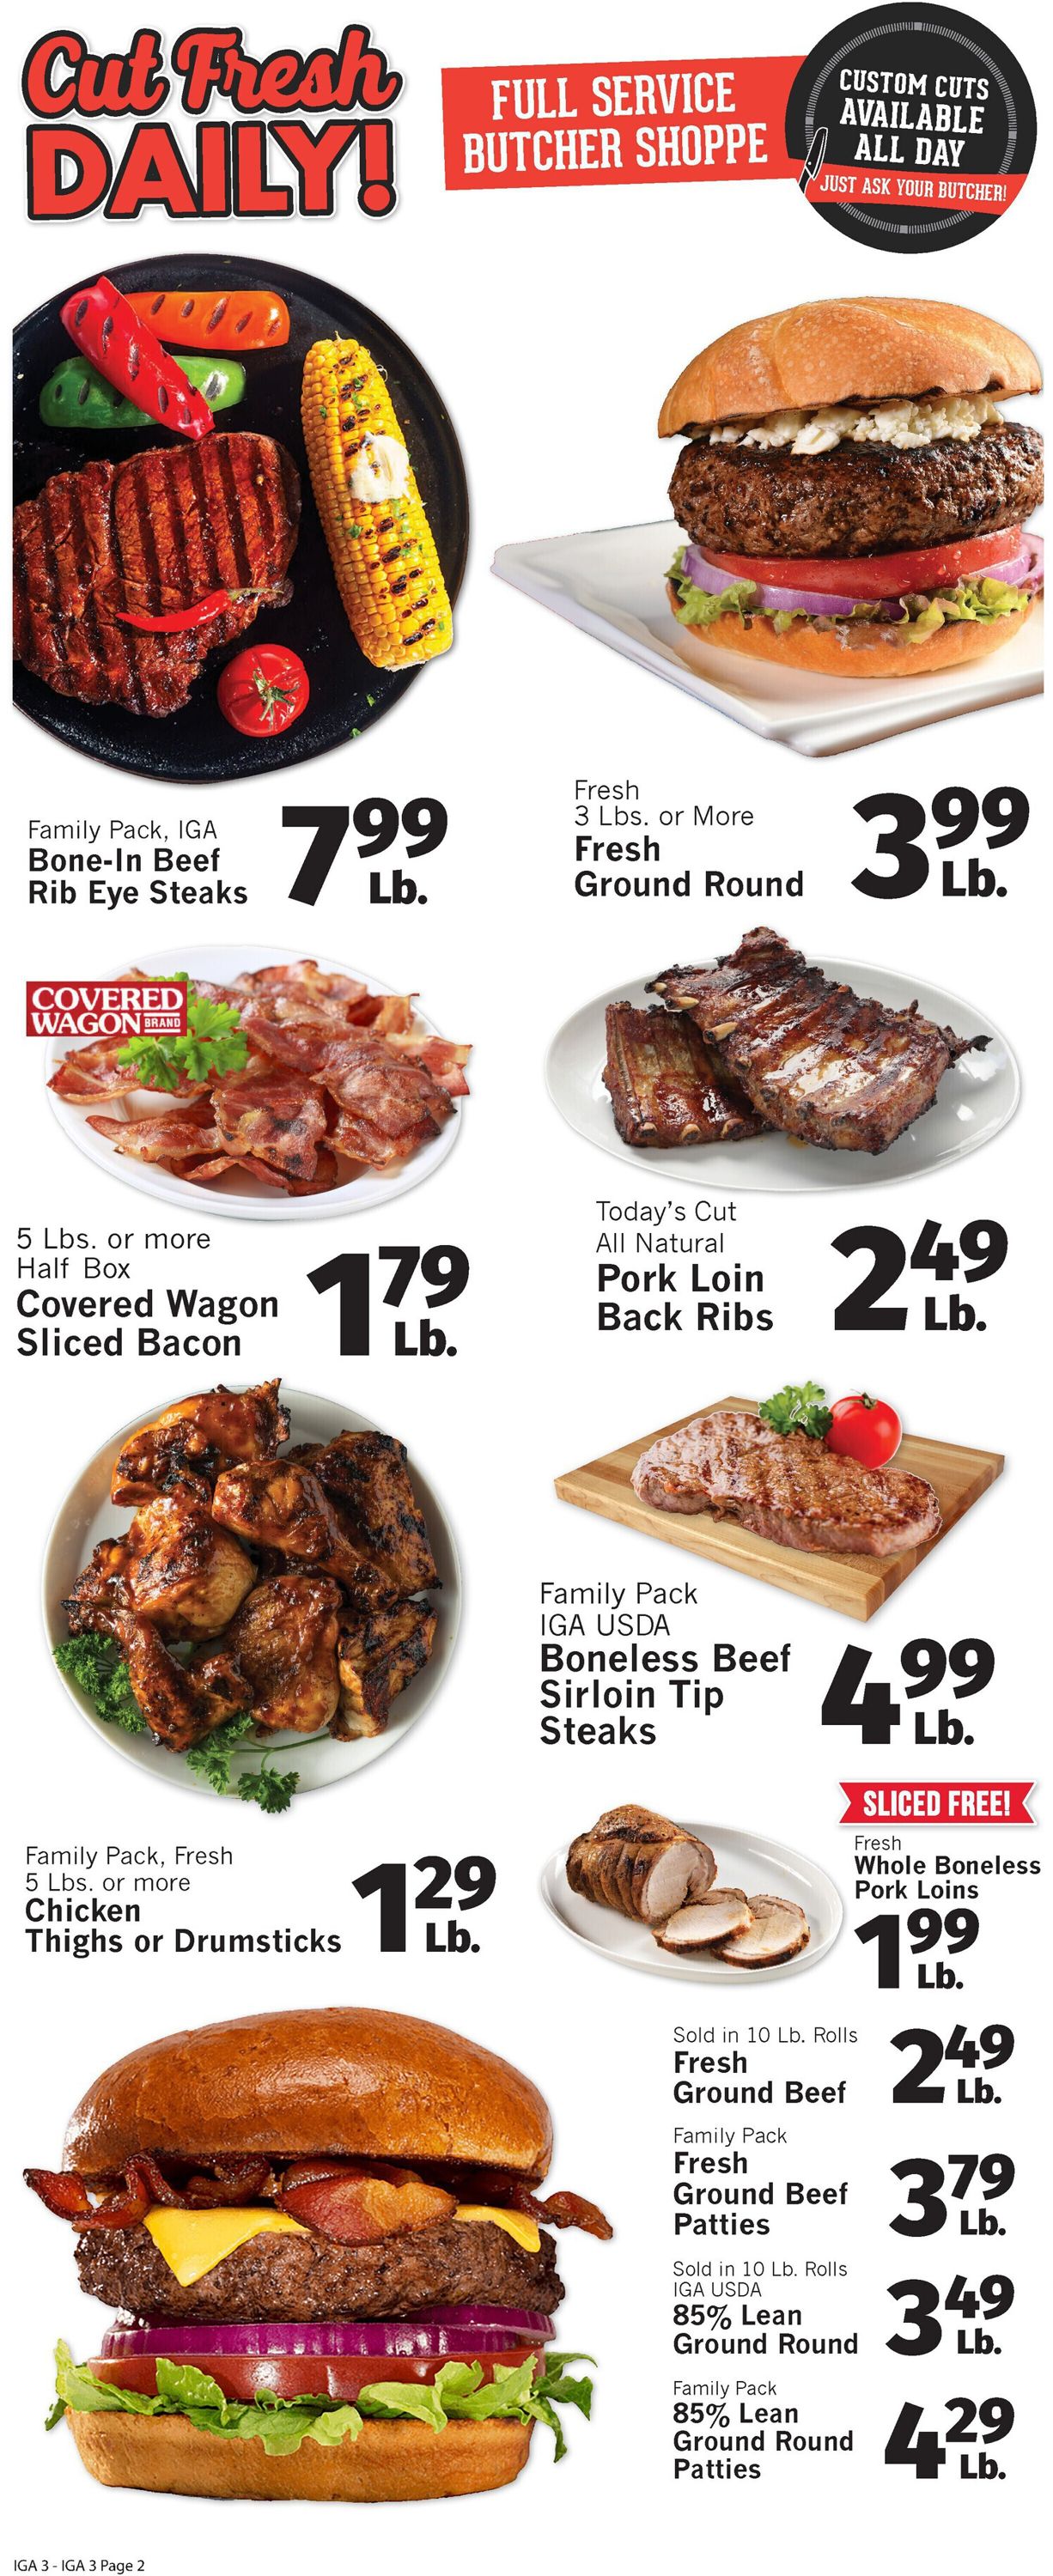 IGA Ad from 01/27/2021